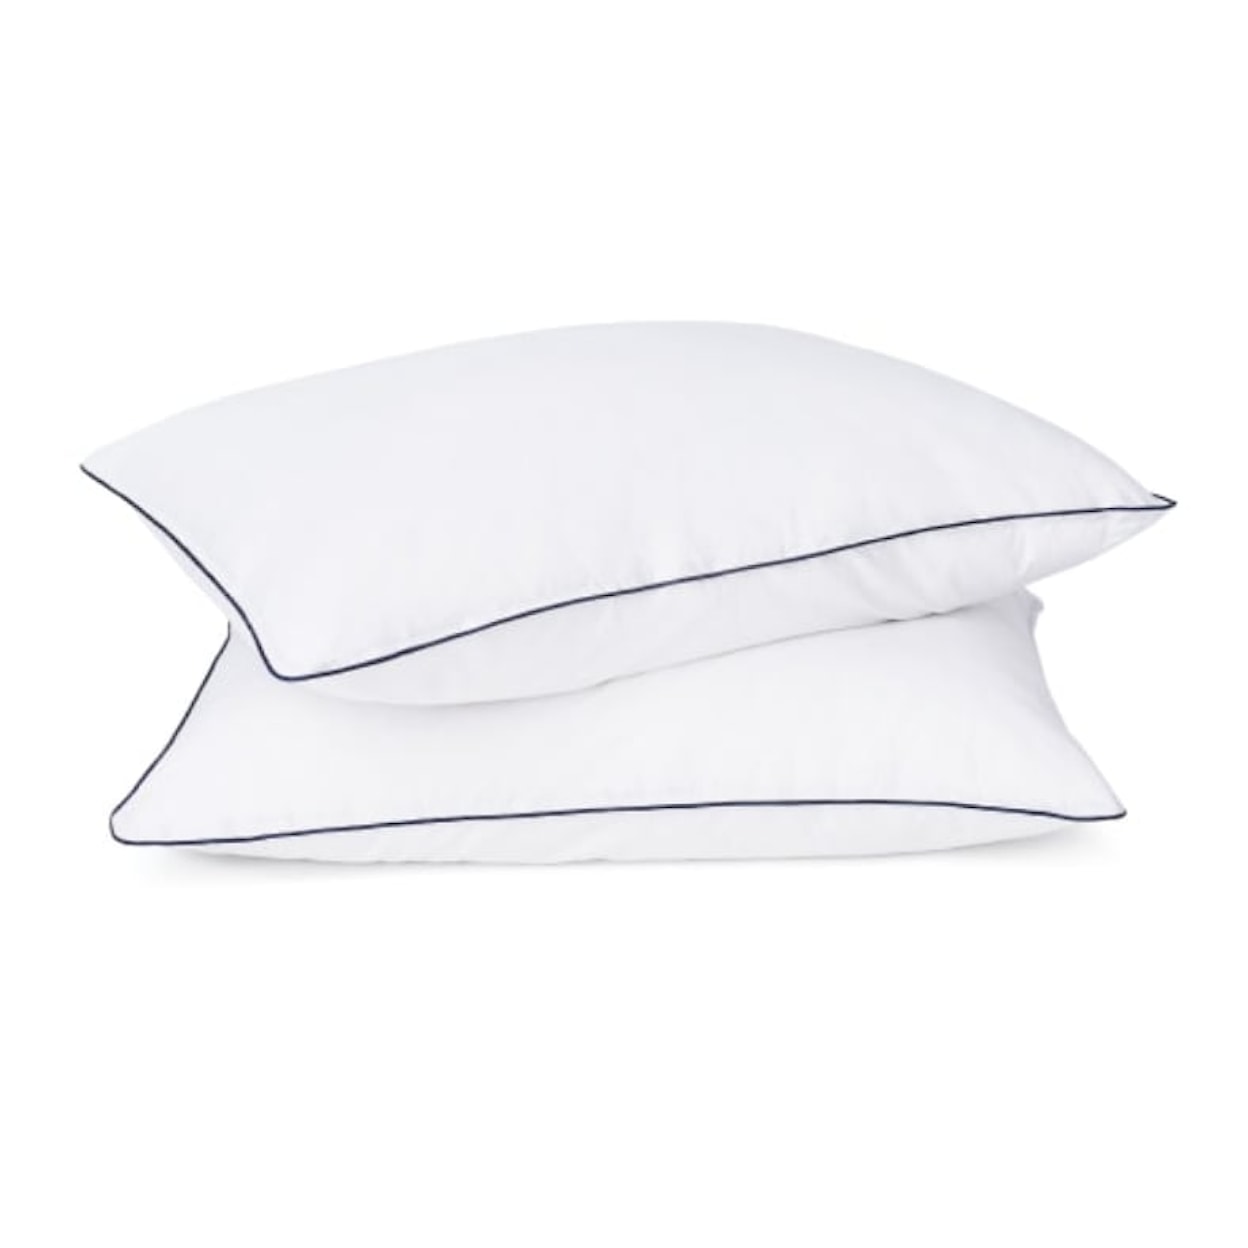 Helix Sunset Luxe Sunset Luxe Full + FREE Pillow